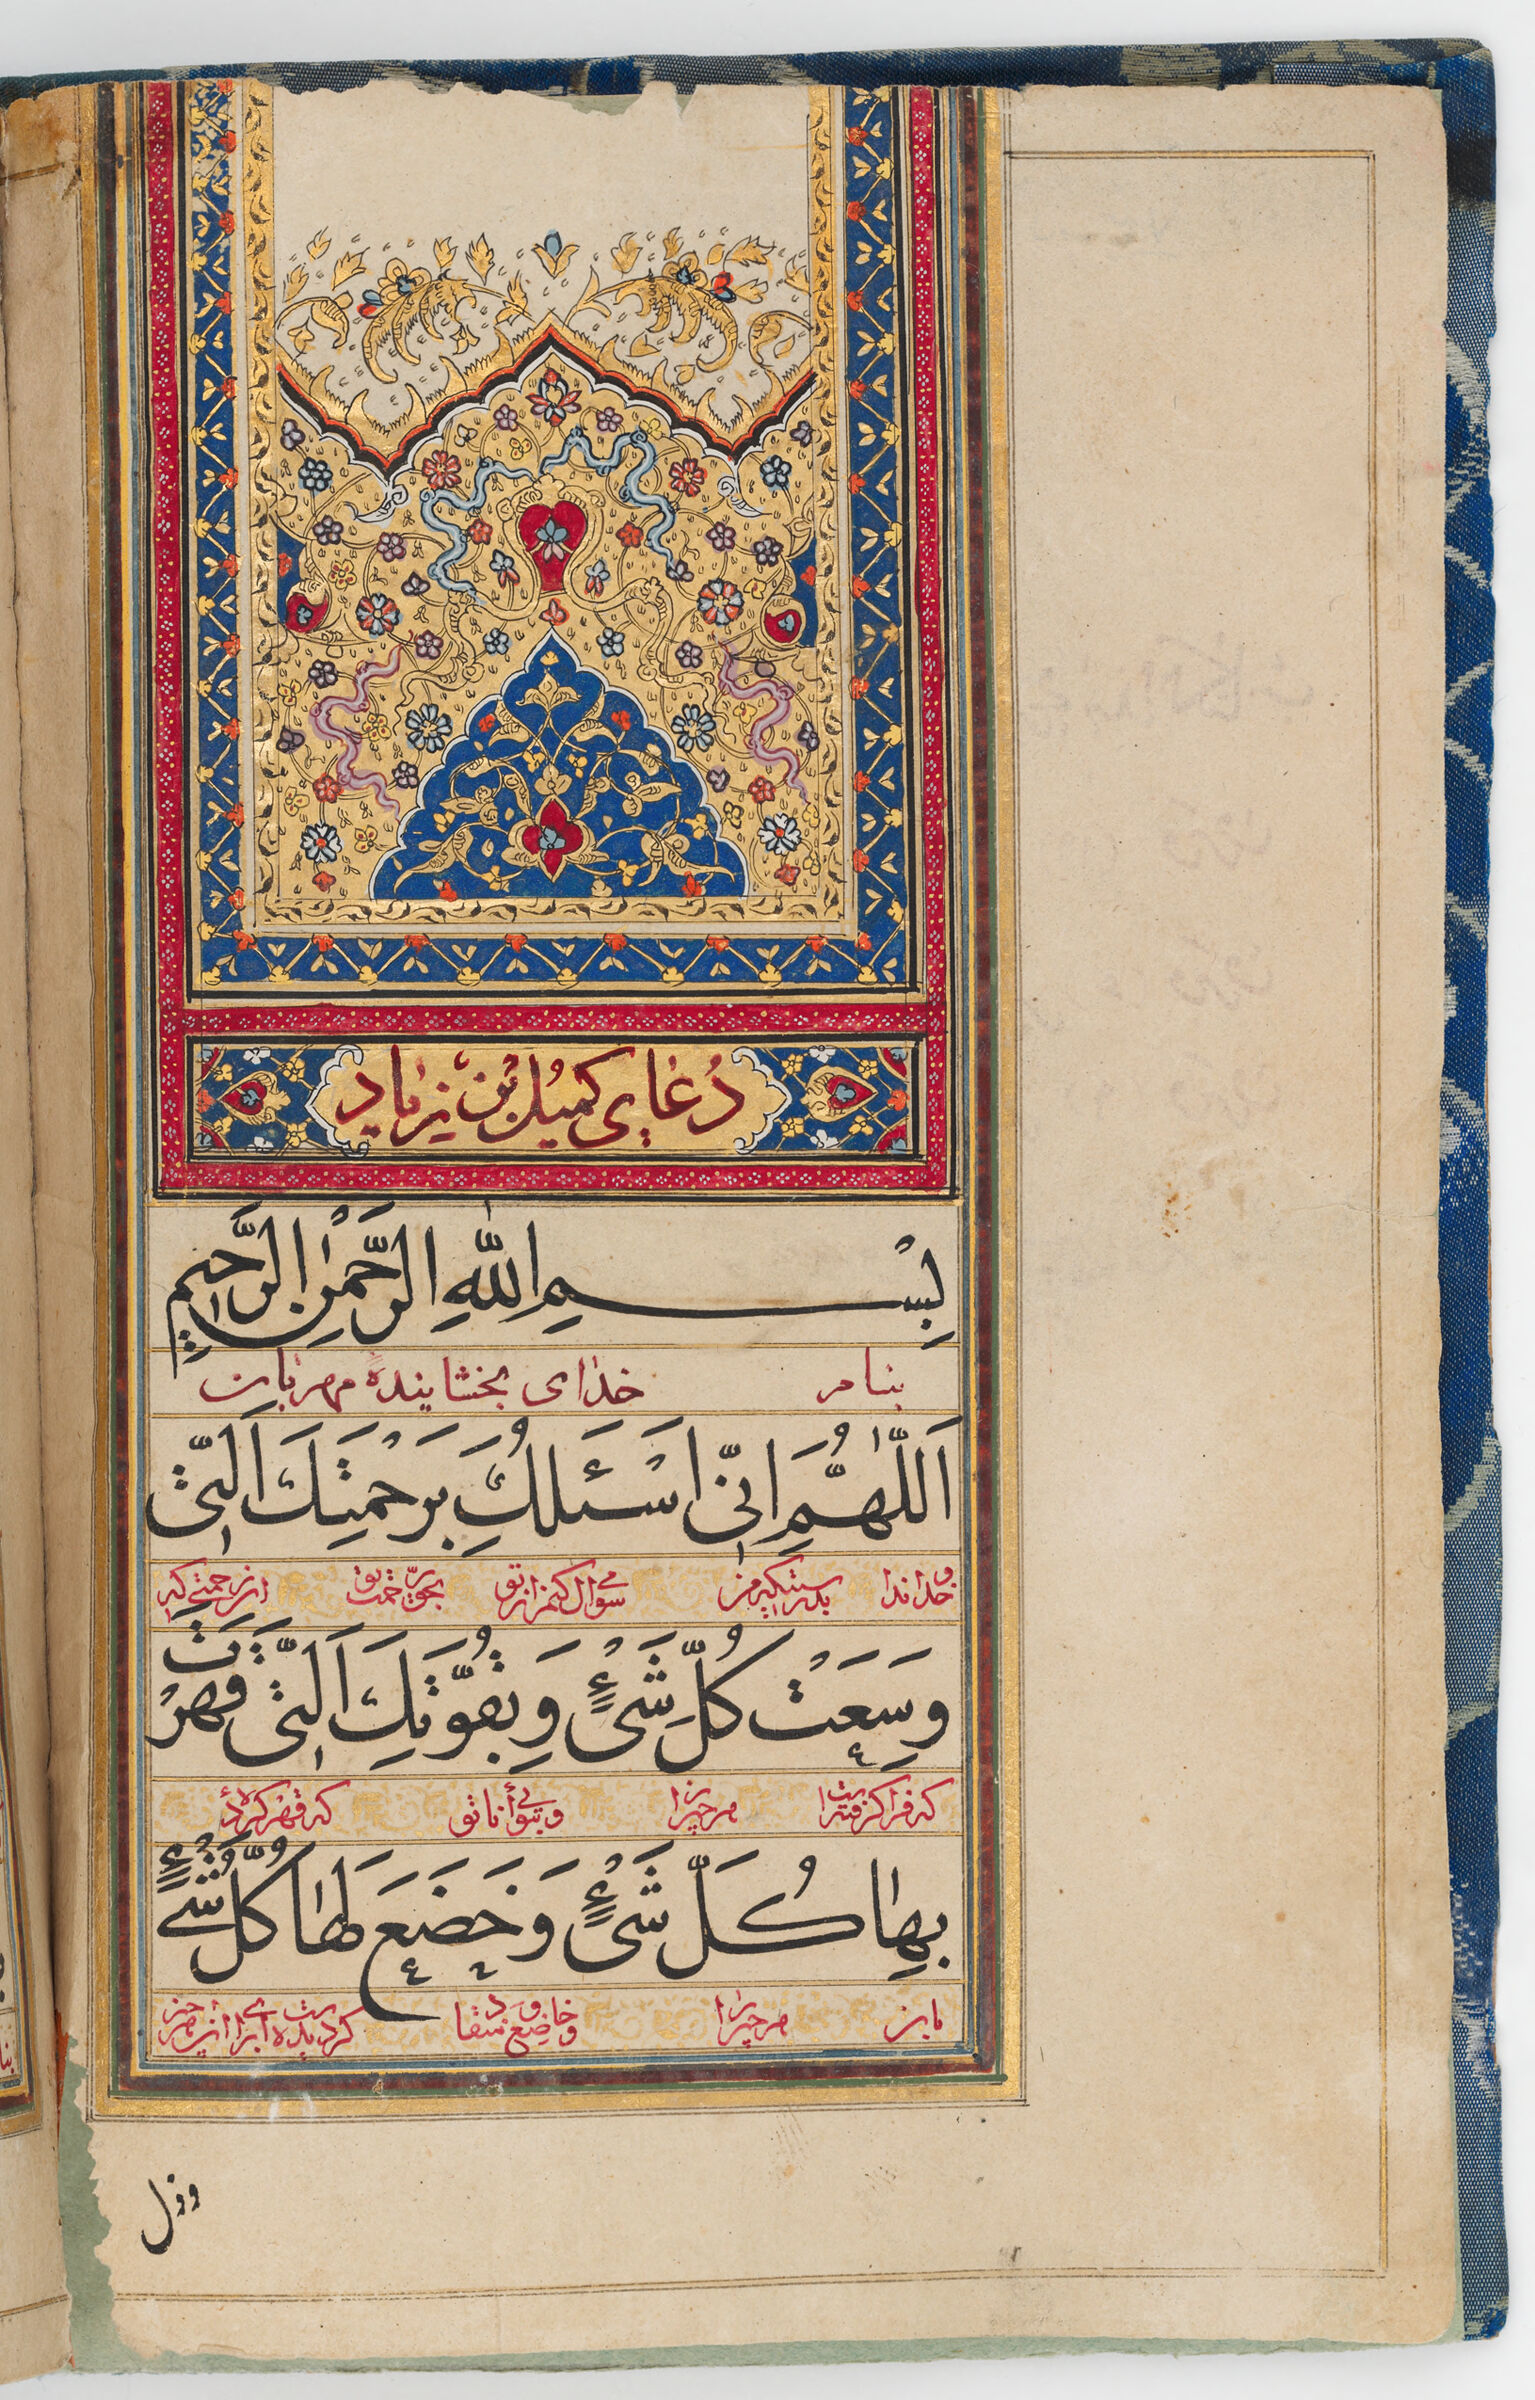 Folio With An Illuminated Sarlawh; Table Of Contents (Table Of Contents Recto; Sarlawh Verso Of Folio 1), From A Manuscript Of Prayers